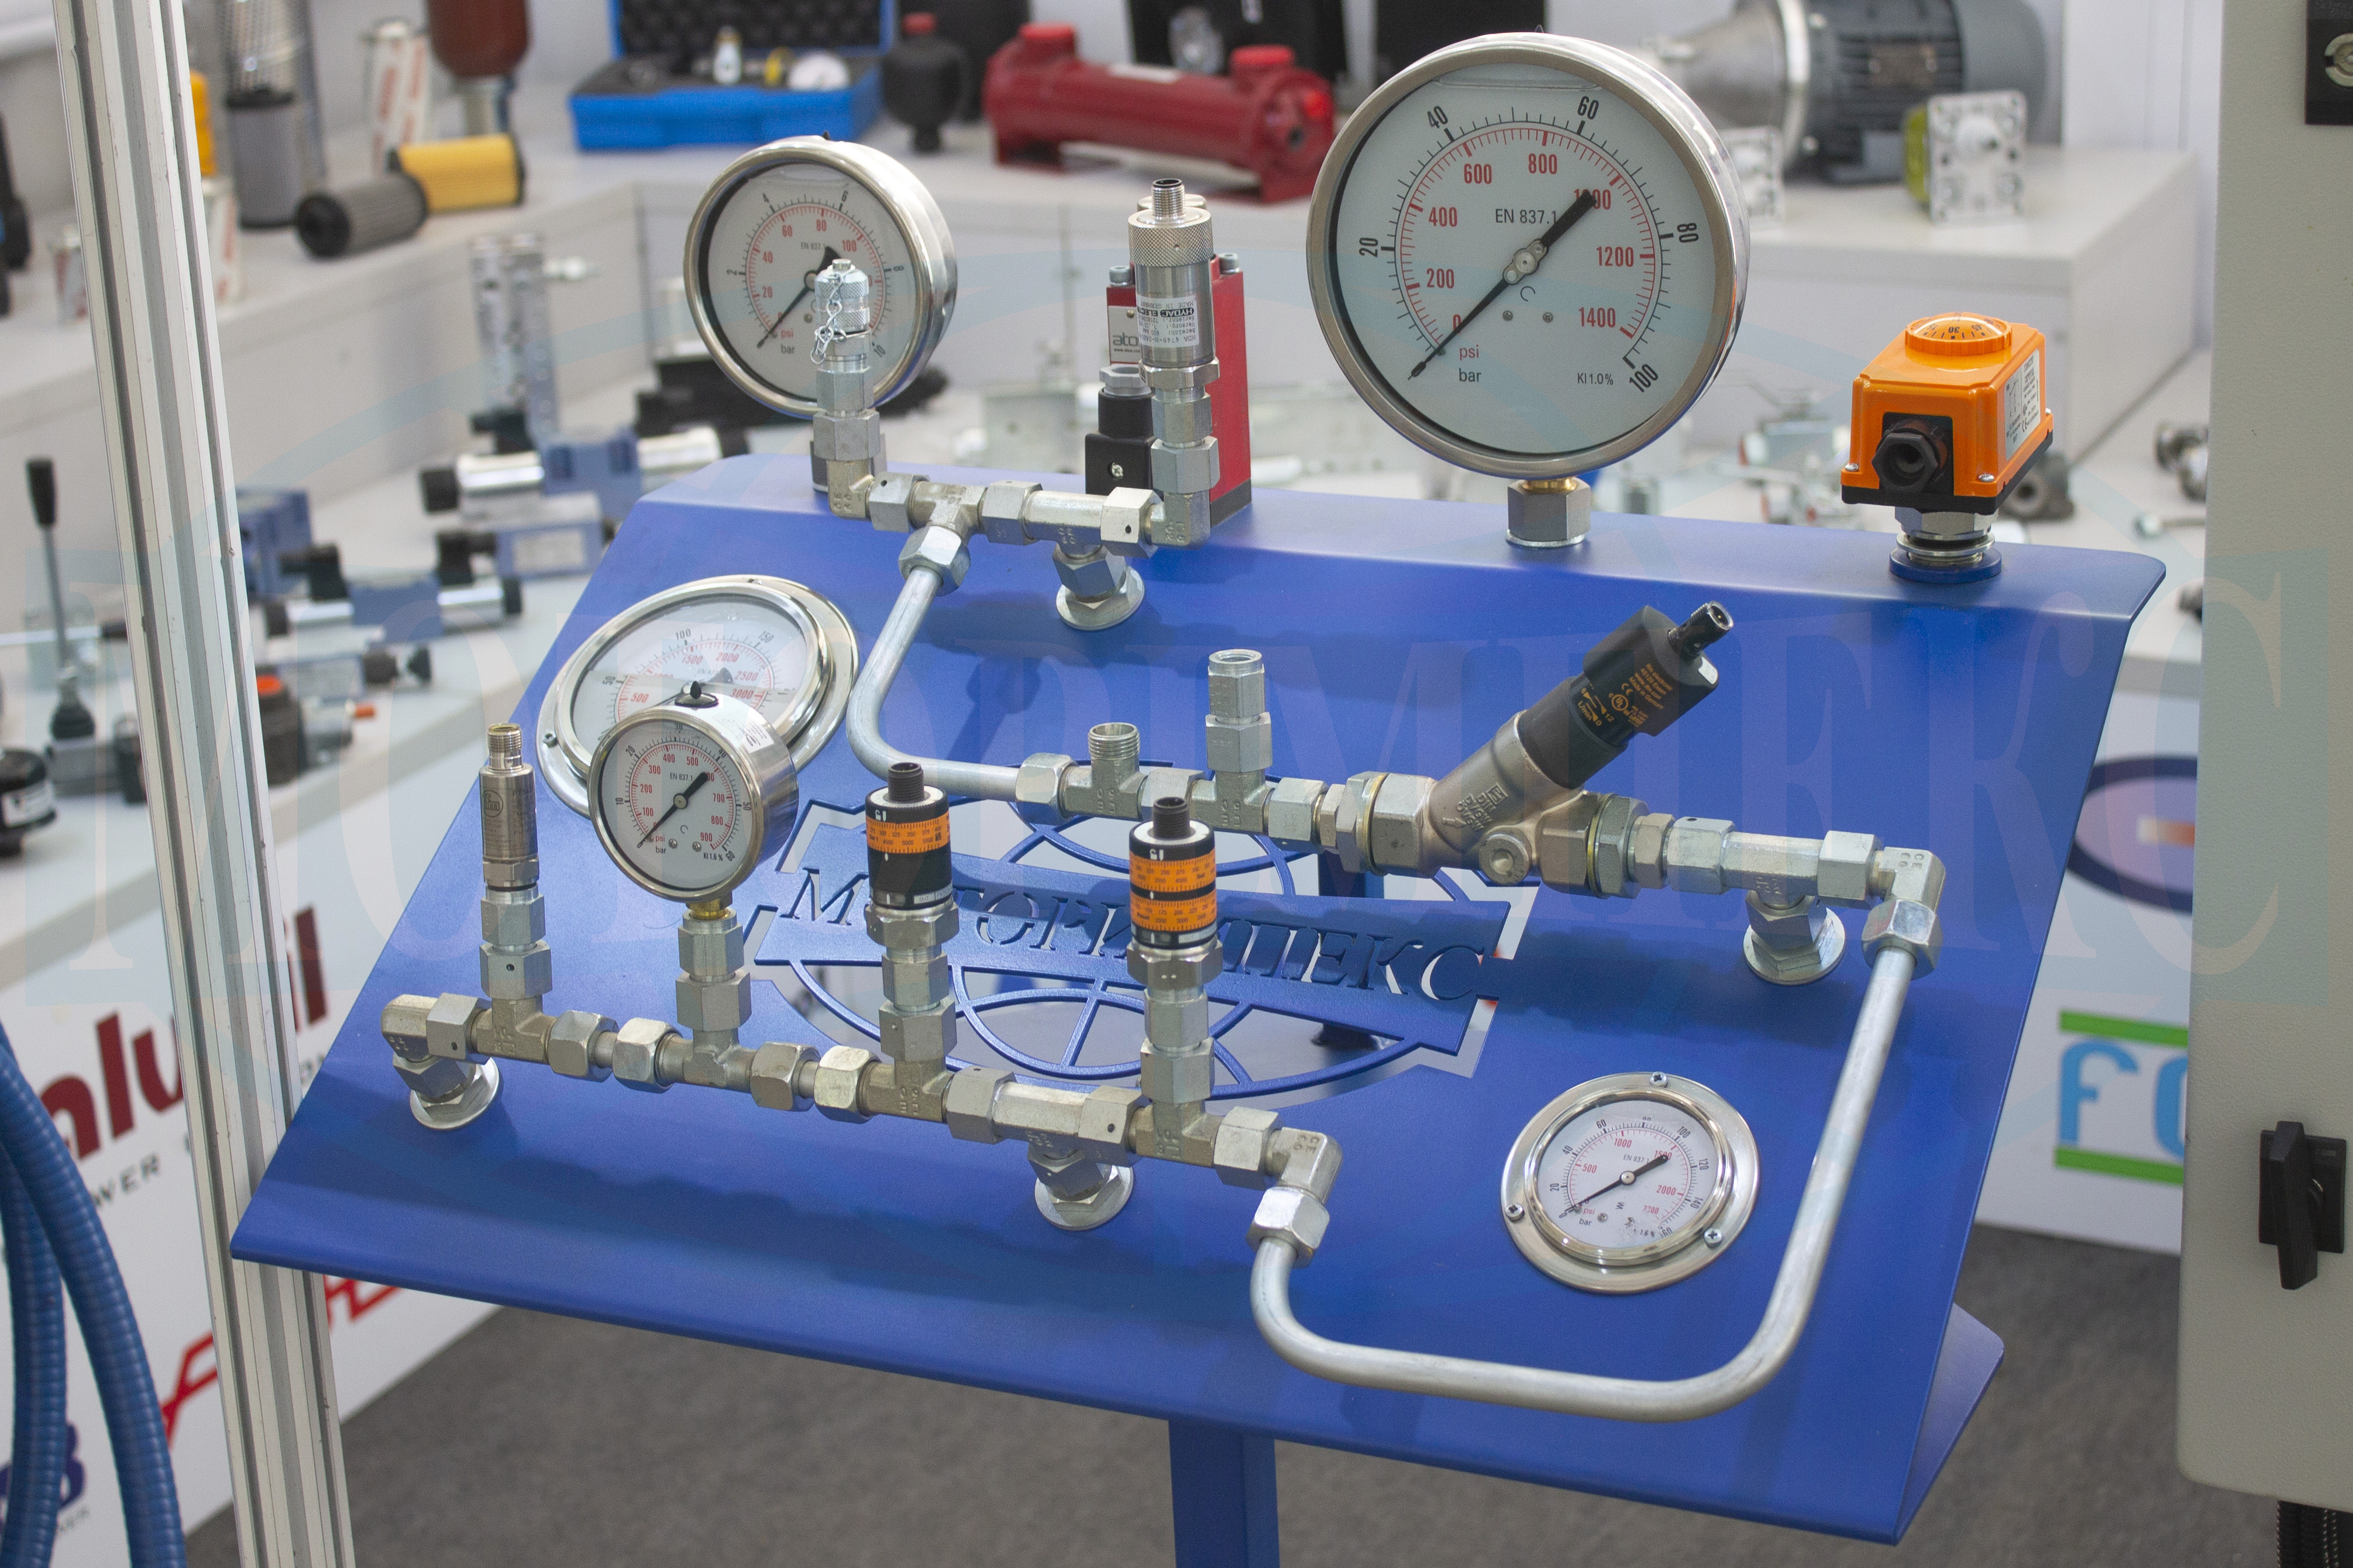 Control and measuring equipment for hydraulics from 'Motorimpex'